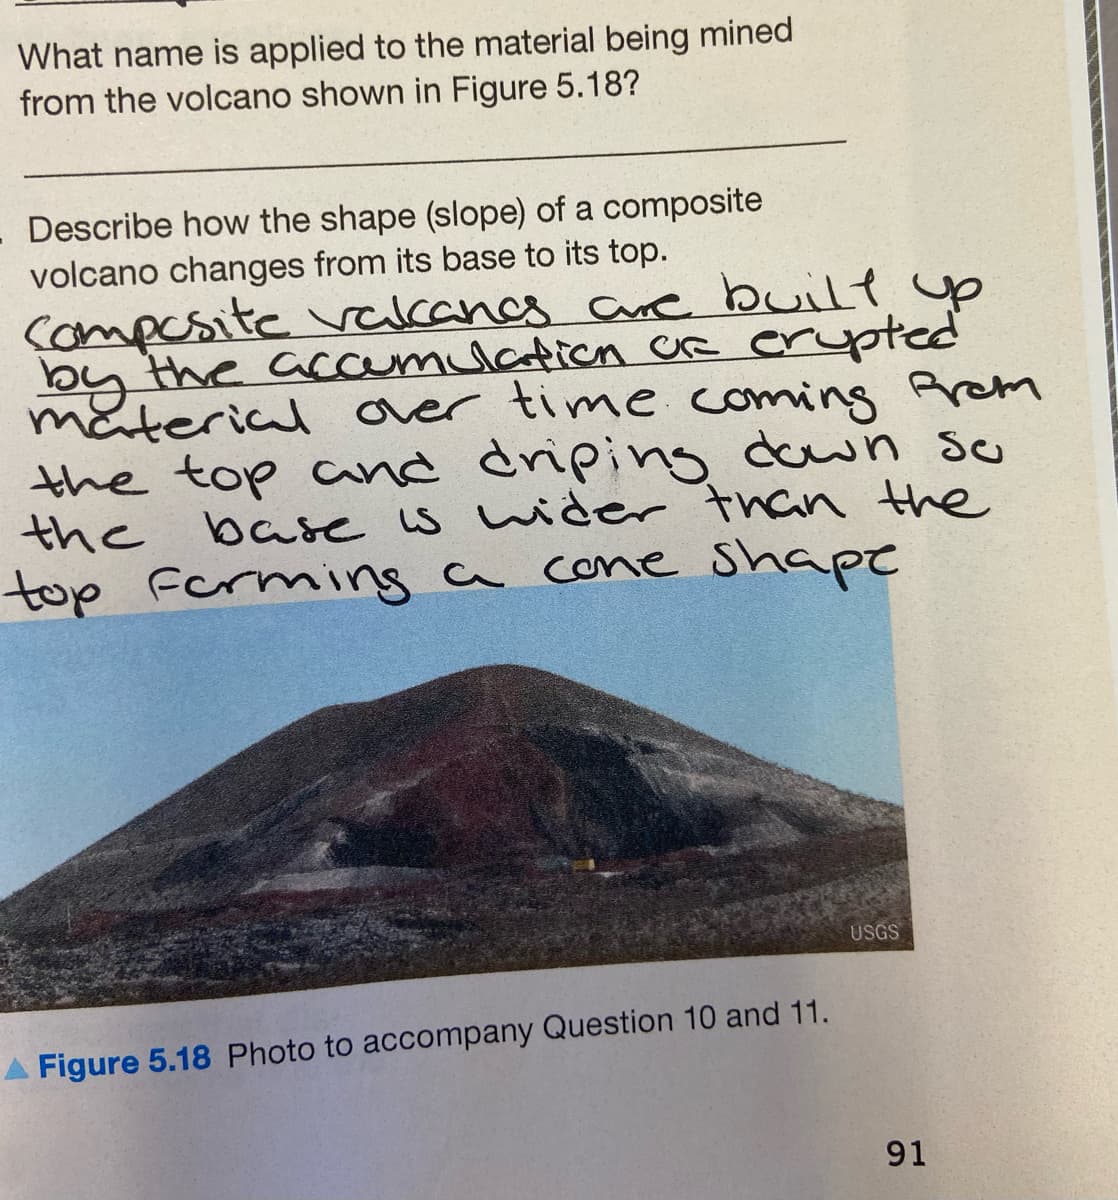 What name is applied to the material being mined
from the volcano shown in Figure 5.18?
Describe how the shape (slope) of a composite
volcano changes from its base to its top.
Compesite vacancs Cure built yp
by the accamulation CR erypted
mäterial over time coming Rrem
the top cand driping down s
the base s wider than the
top ferming a cone Shape
USGS
Figure 5.18 Photo to accompany Question 10 and 11.
91
